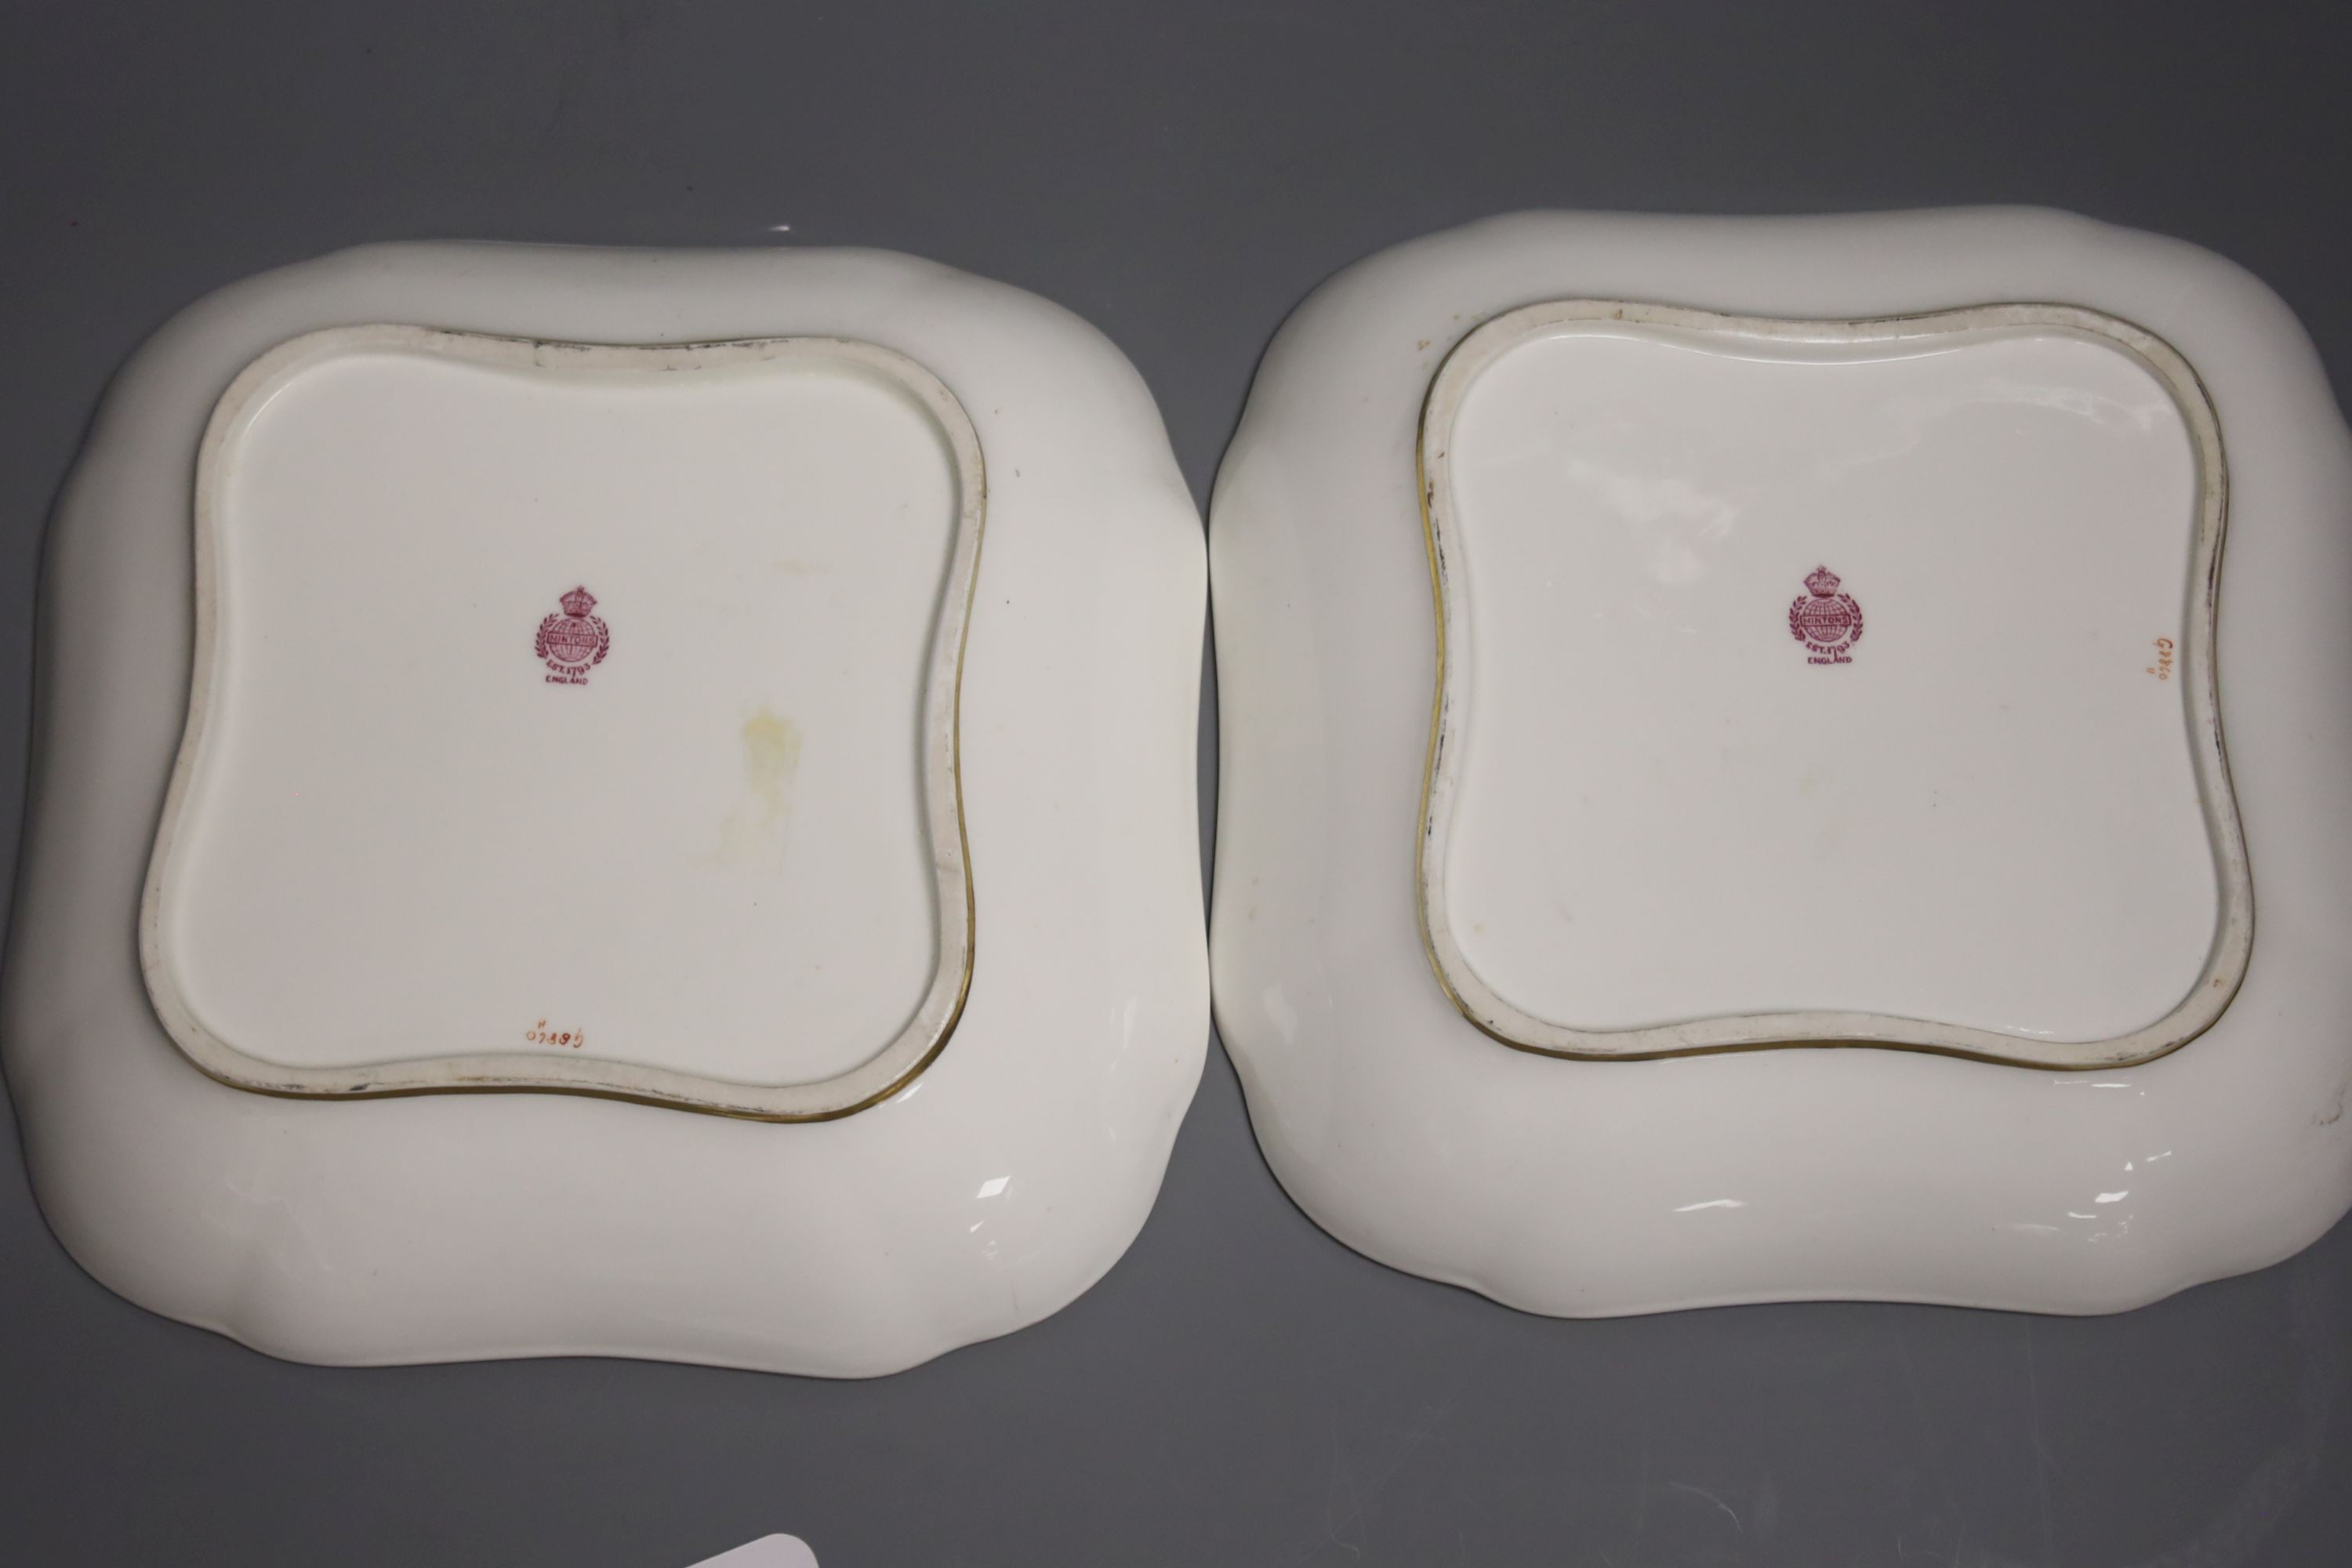 A pair of Minton’s fruit painted dishes of squared form, early 20th century, with tooled gilt borders, signed J C Dean, 21cm diameter.